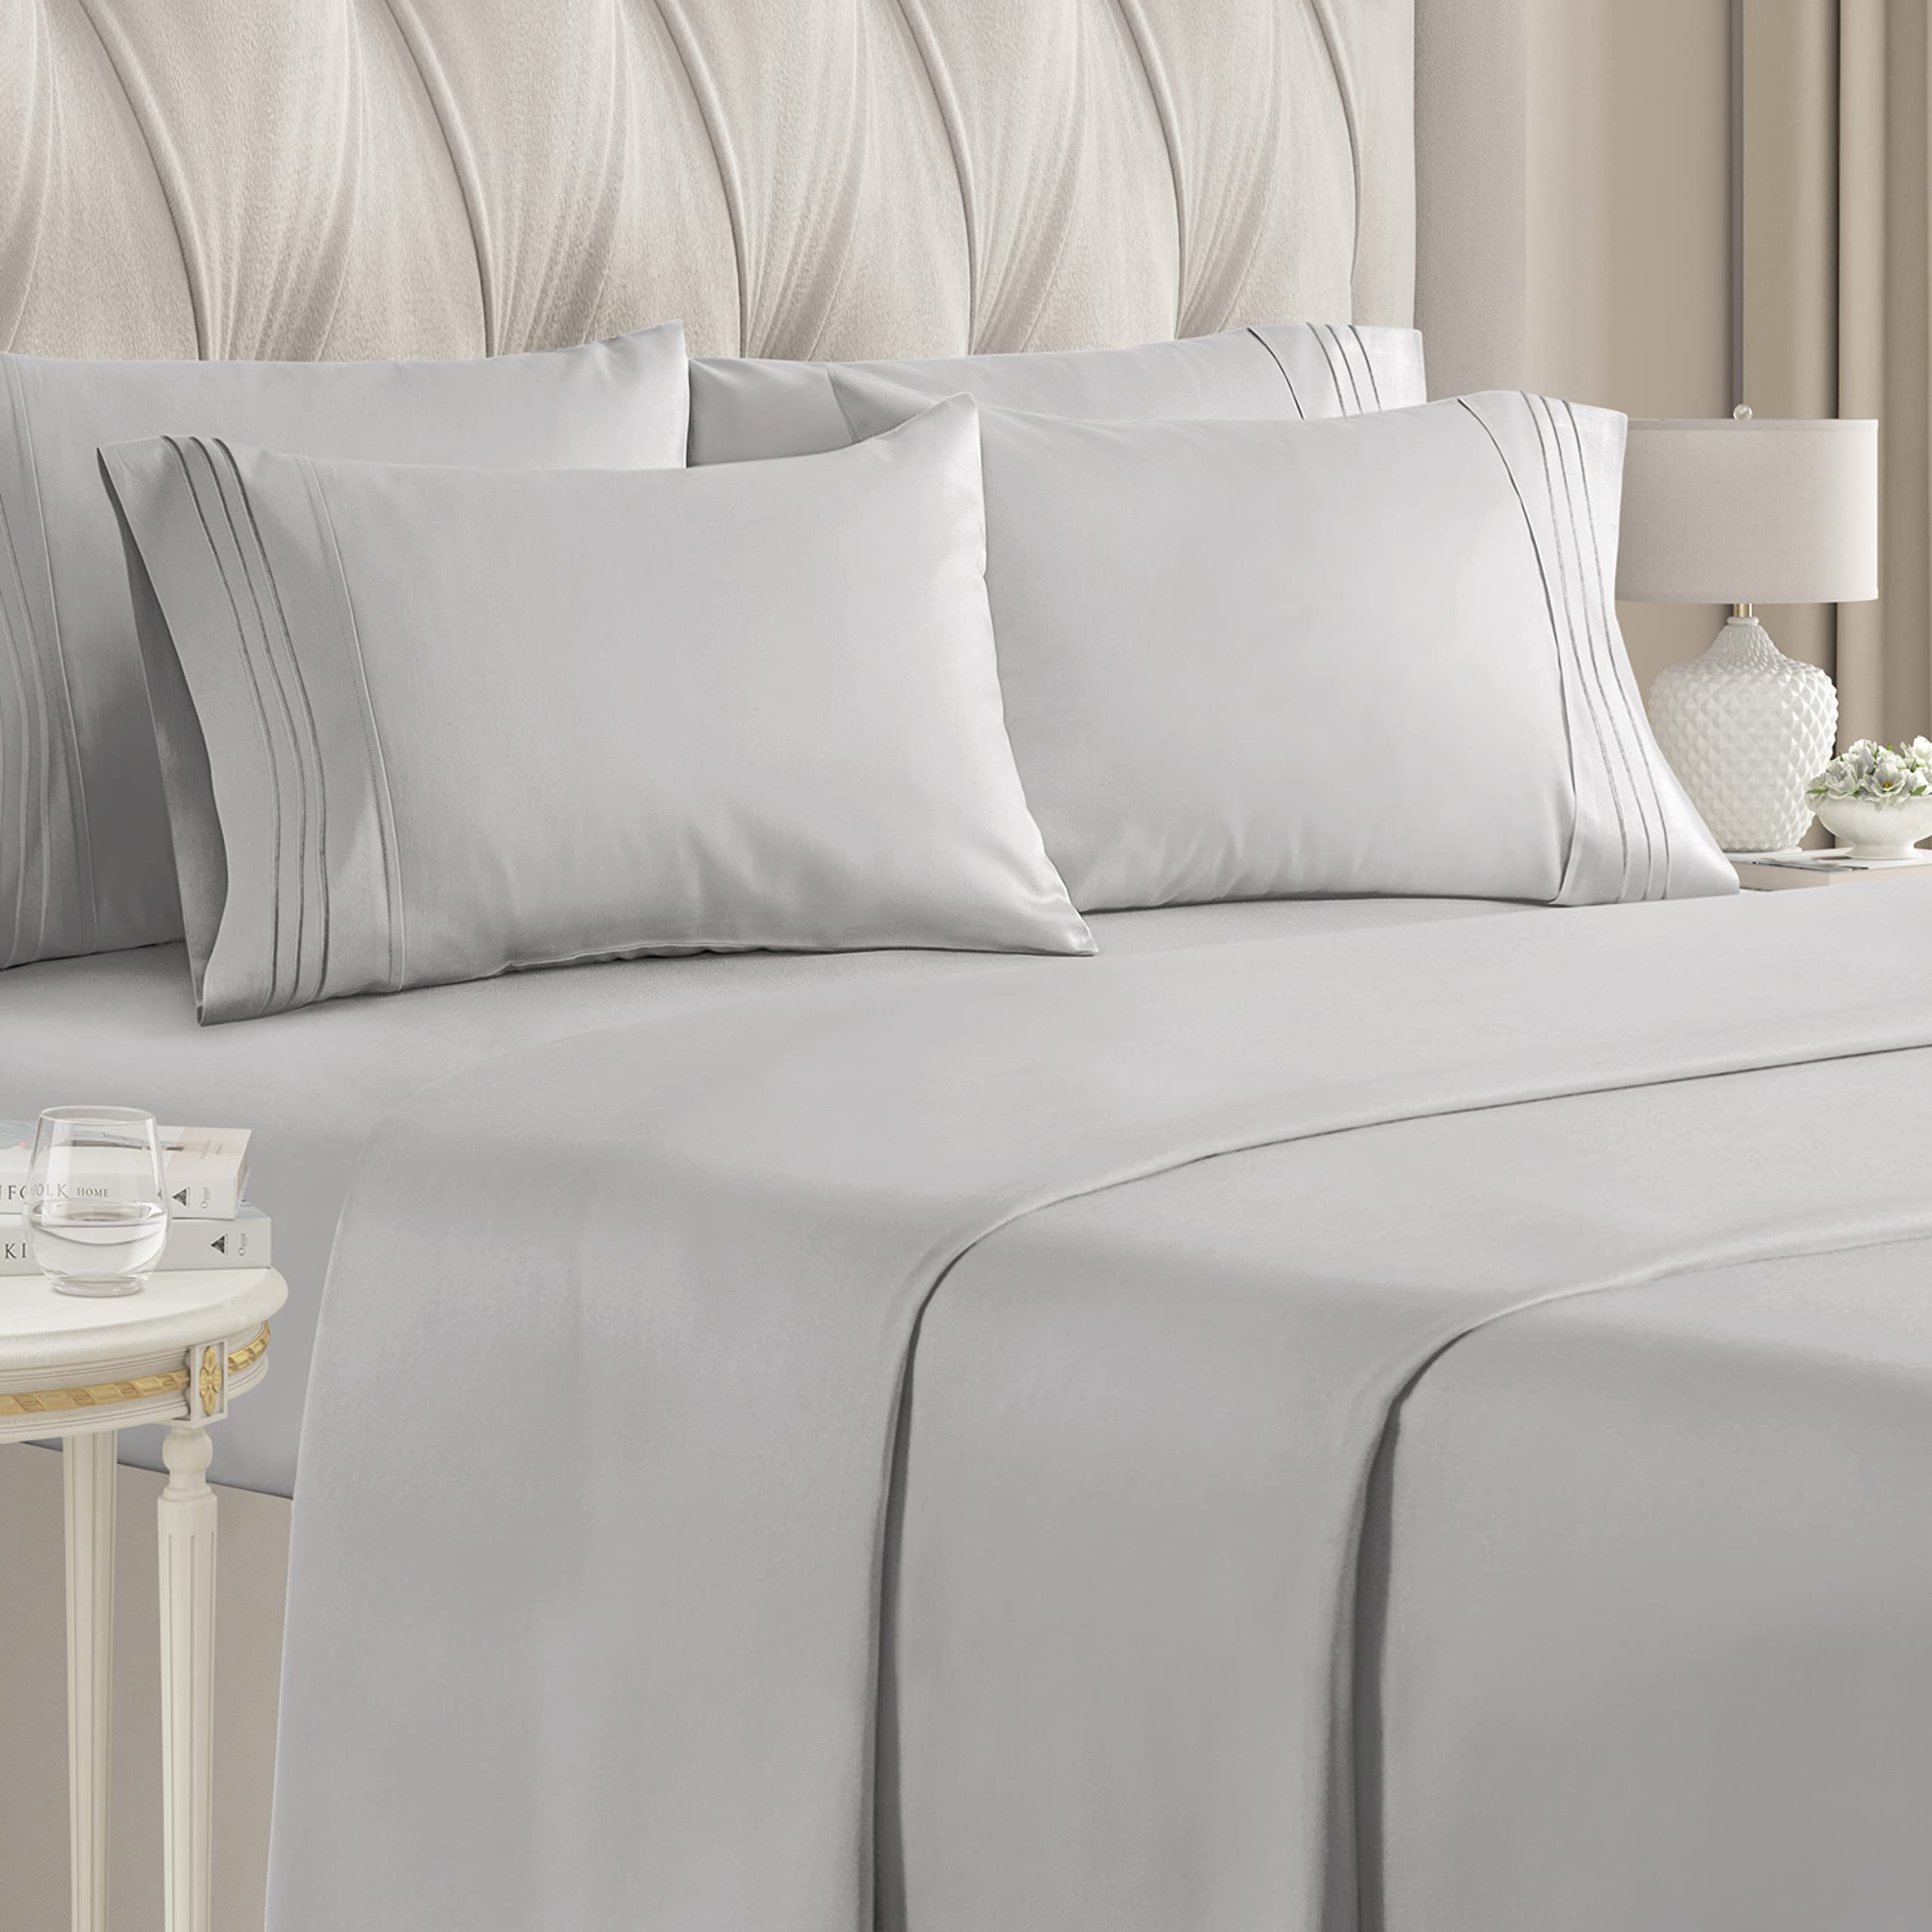 Book Cover Full Size Sheet Set - 6 Piece Set - Hotel Luxury Bed Sheets - Extra Soft - Deep Pockets - Easy Fit - Breathable & Cooling Sheets - Wrinkle Free - Gray - Light Grey Bed Sheets - Fulls Sheets - 6 PC 02 - Light Grey Full